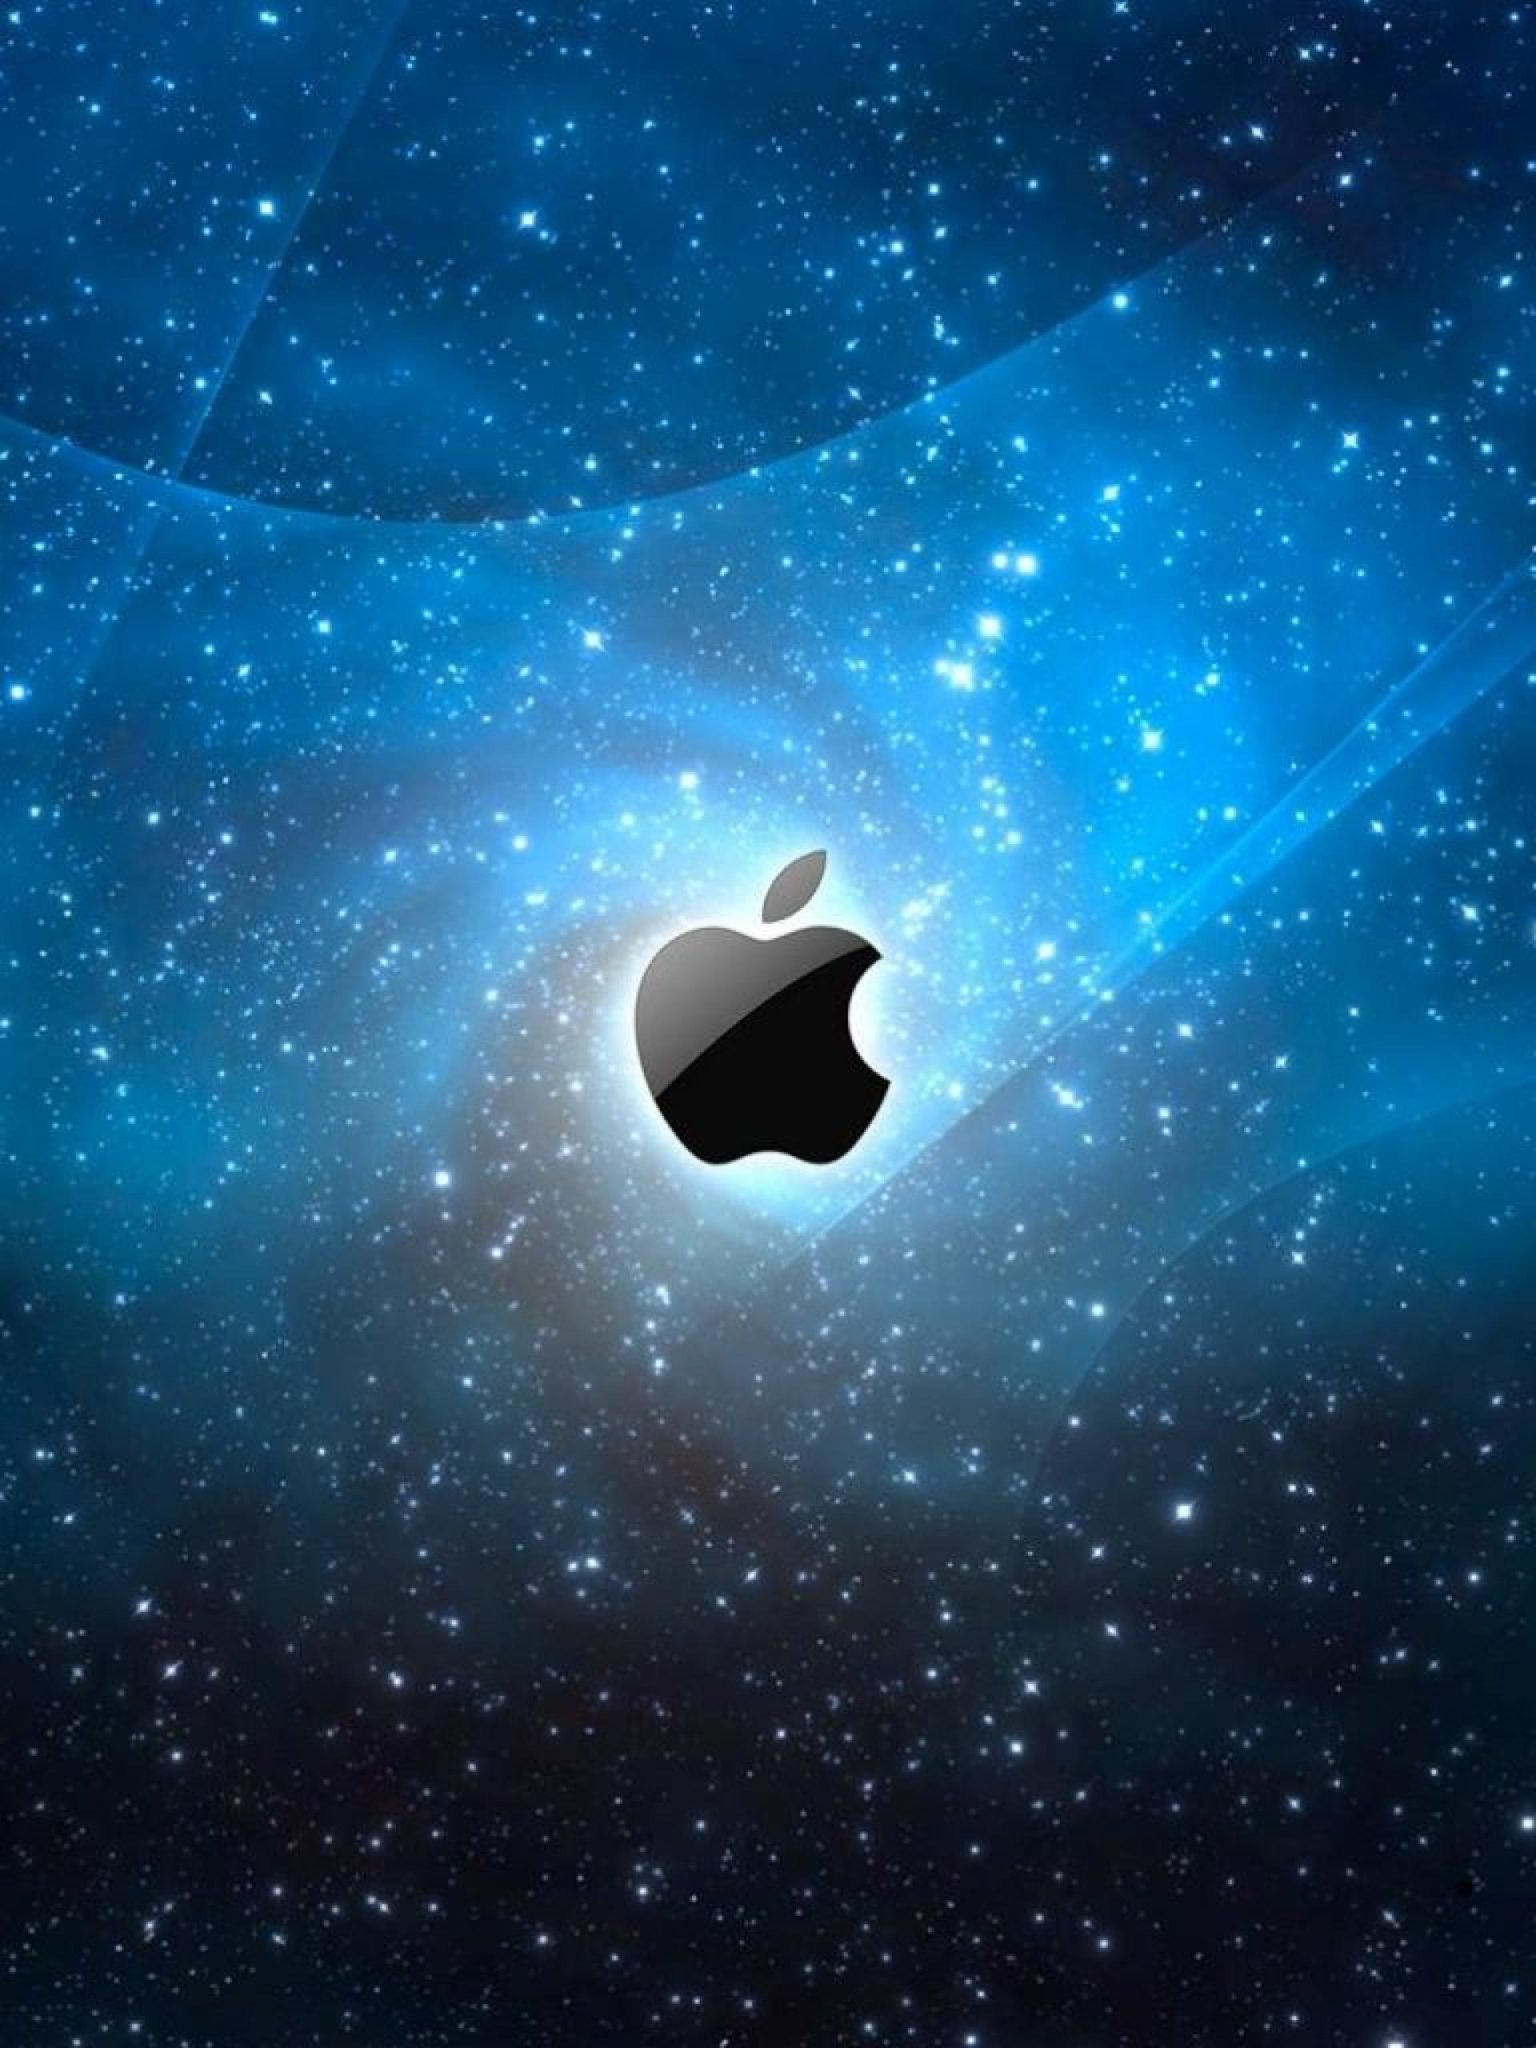 Apple Logo In Space Cool Wallpapers 3d Design – HD Wallpapers Backgrounds Desktop, iphone & Android Free Download